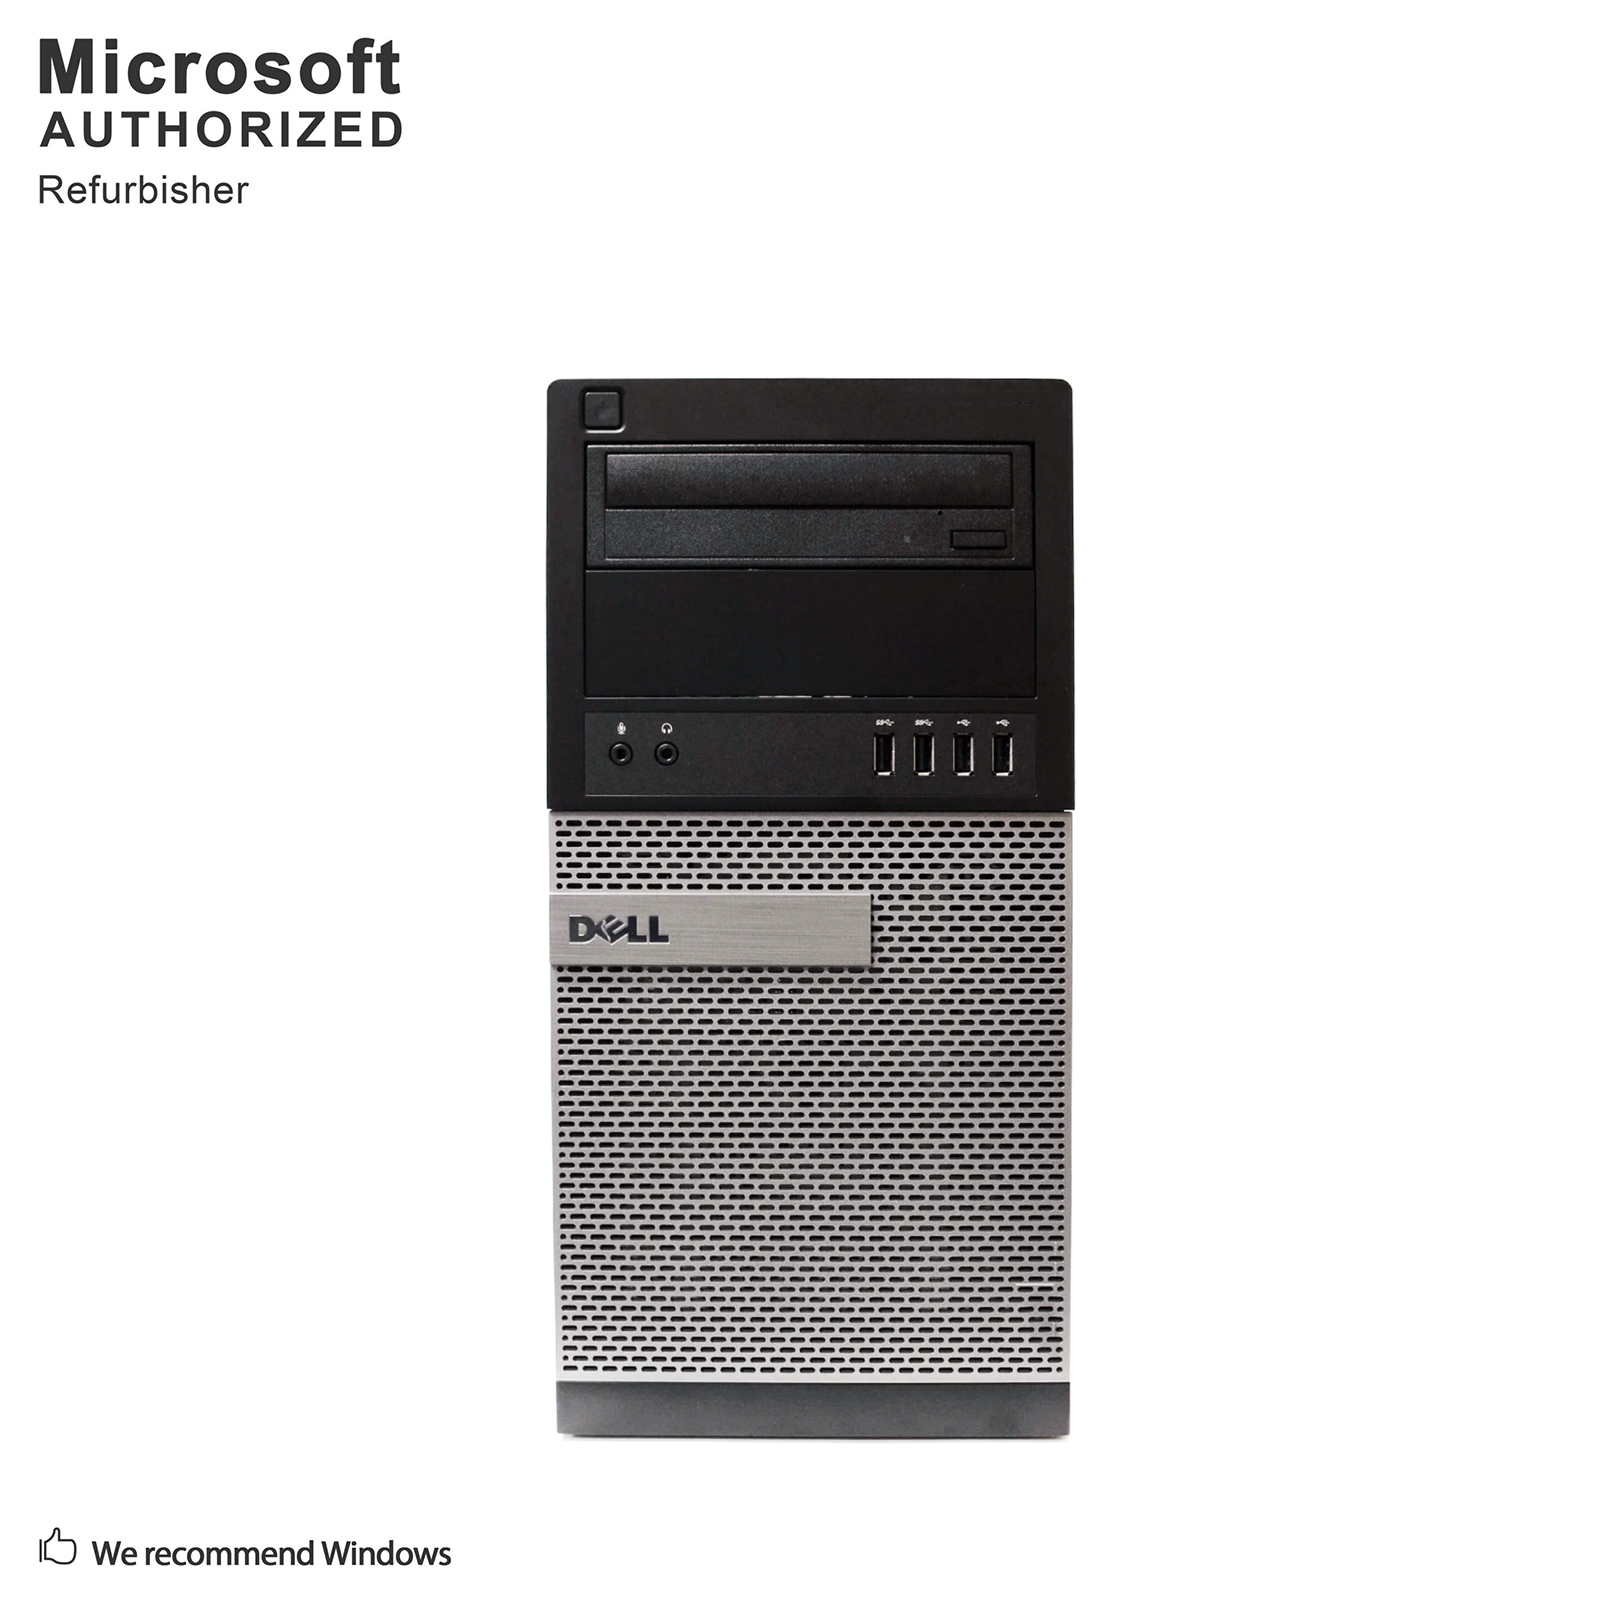 Used Grade A Dell OptiPlex 7010 Tower, Intel Quad Core I7-3770 up to 3.9G, 8G DDR3, 256G SSD, WiFi, BT 4.0, DVD, USB 3.0, VGA, DP, W10P64-Multi Languages Support (EN/ES/FR), 1 year warranty - image 2 of 7